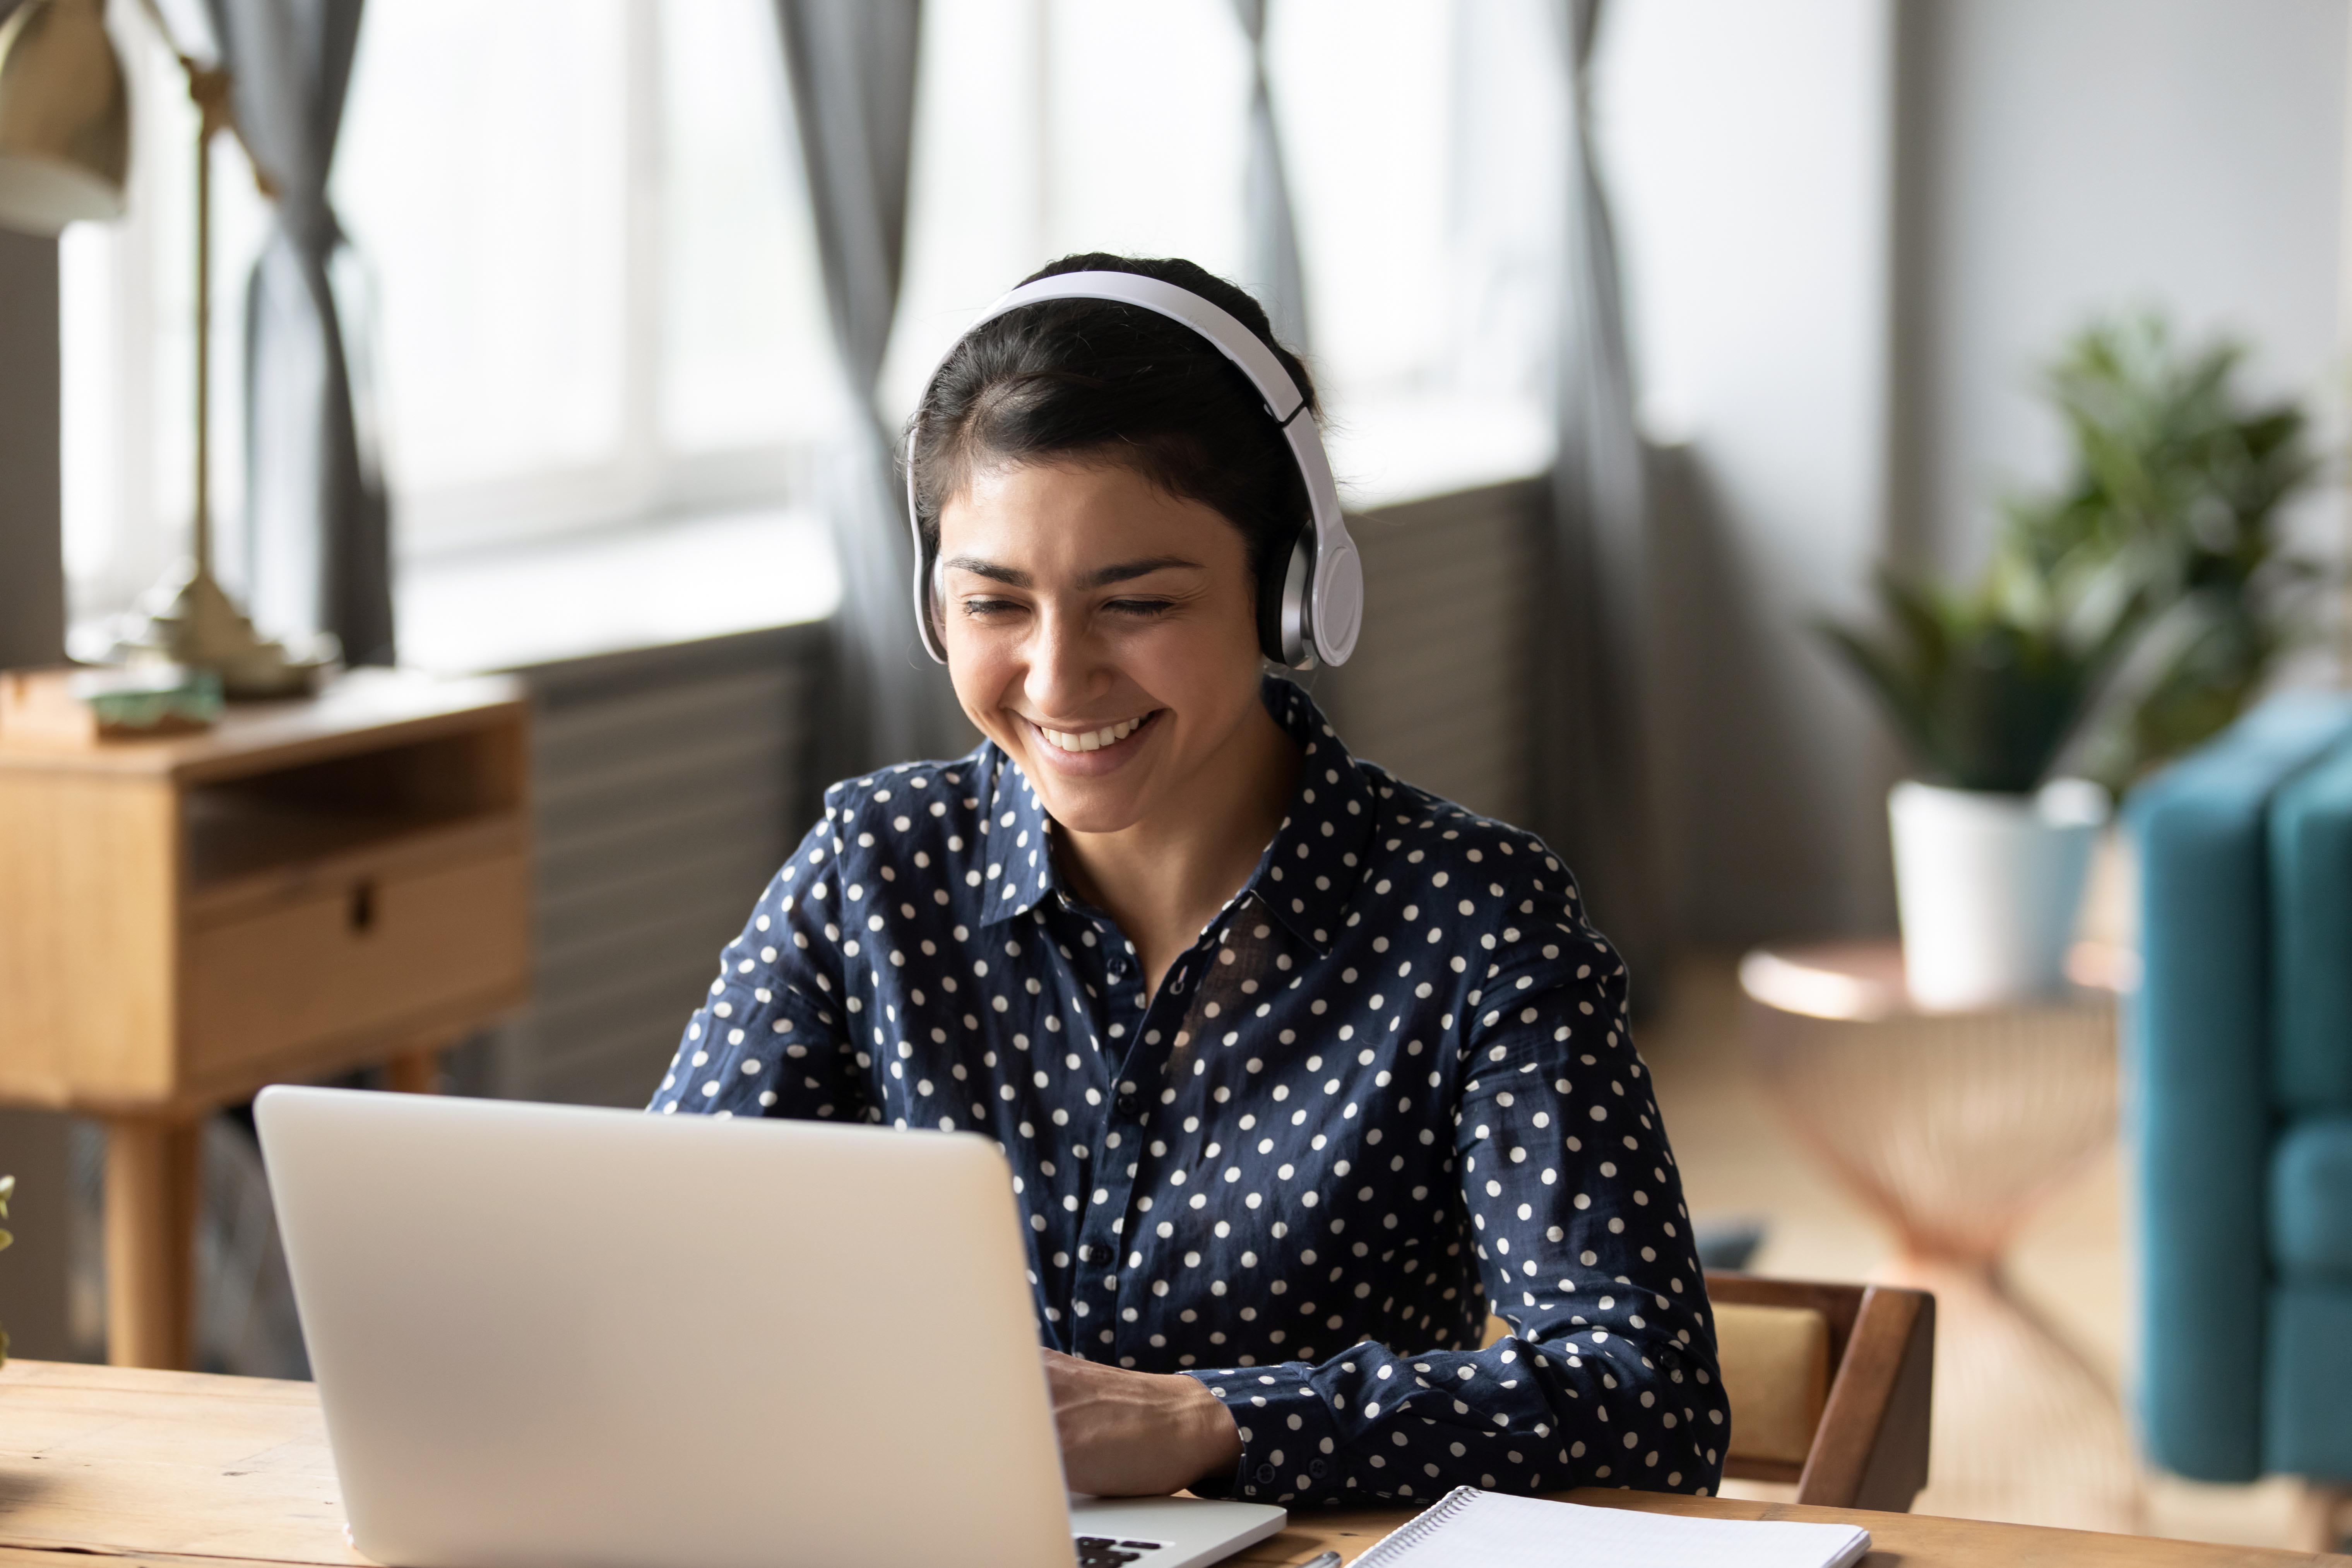 Person sits at desk, wearing headphones and smiling.